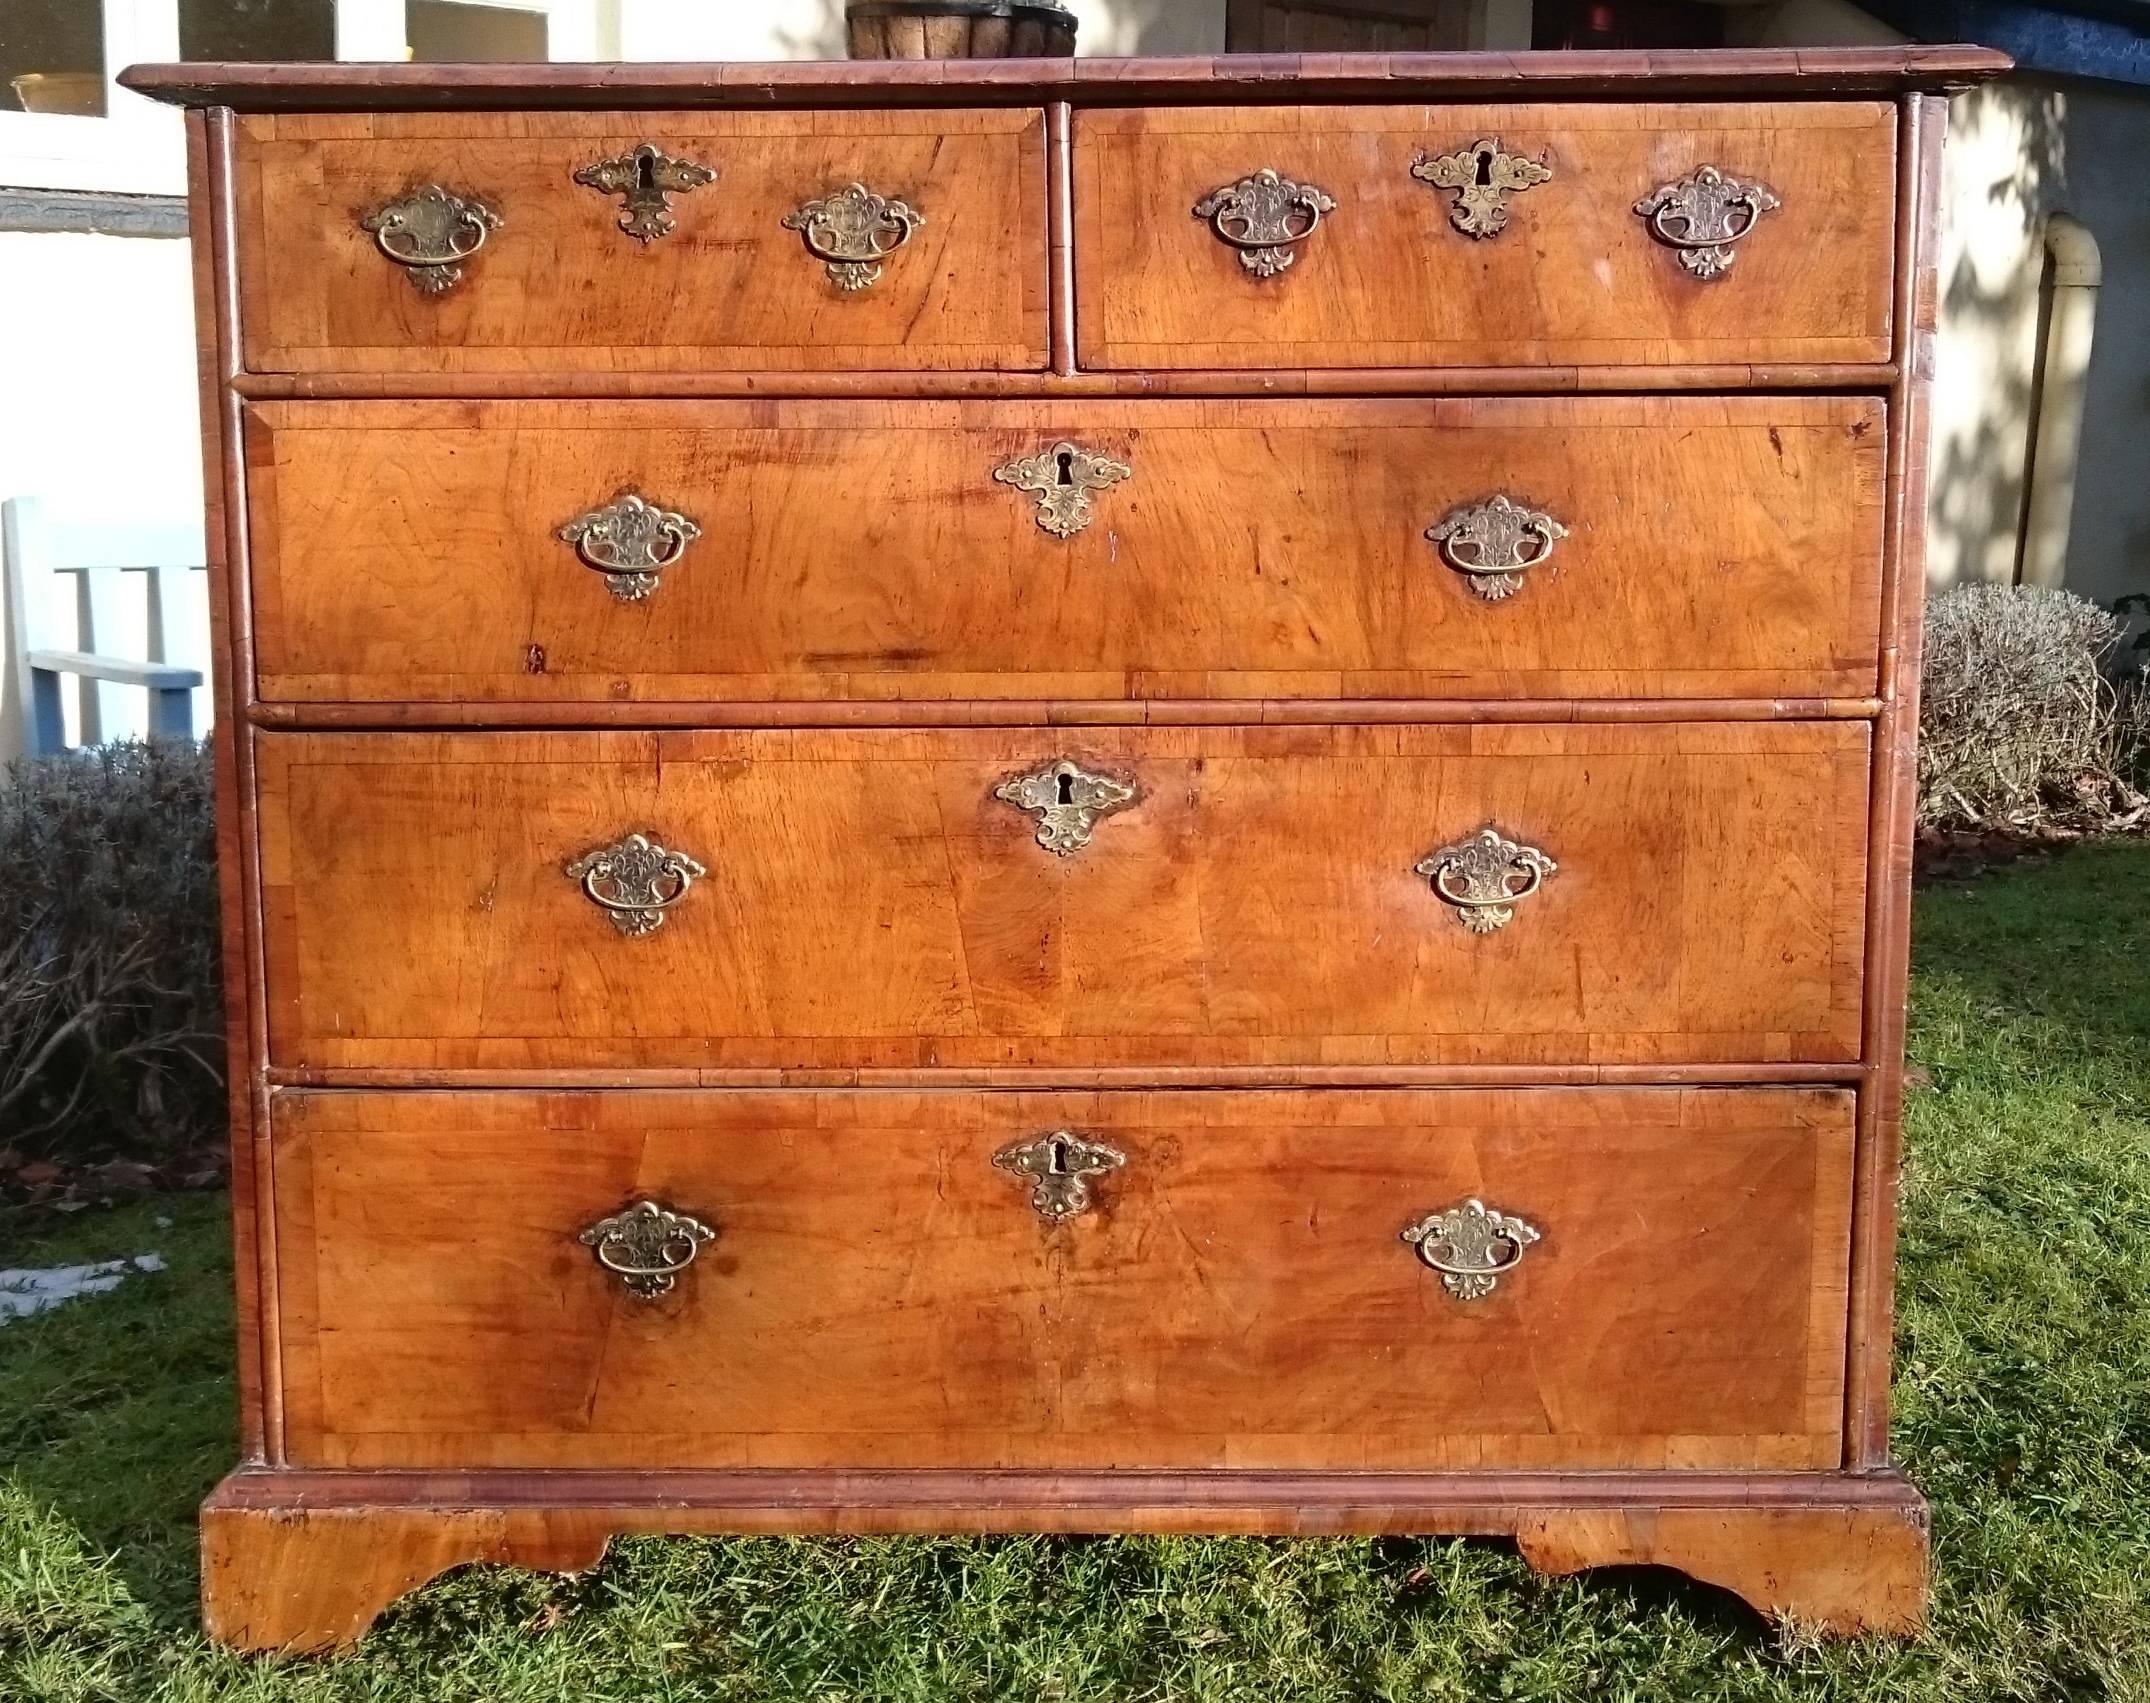 A very fine quality early 18th century walnut chest of drawers. This charming chest of drawers has wonderful quarter cut walnut sides and top comprising four bookmatched quarters to each section. The front and top also have walnut cross banding and